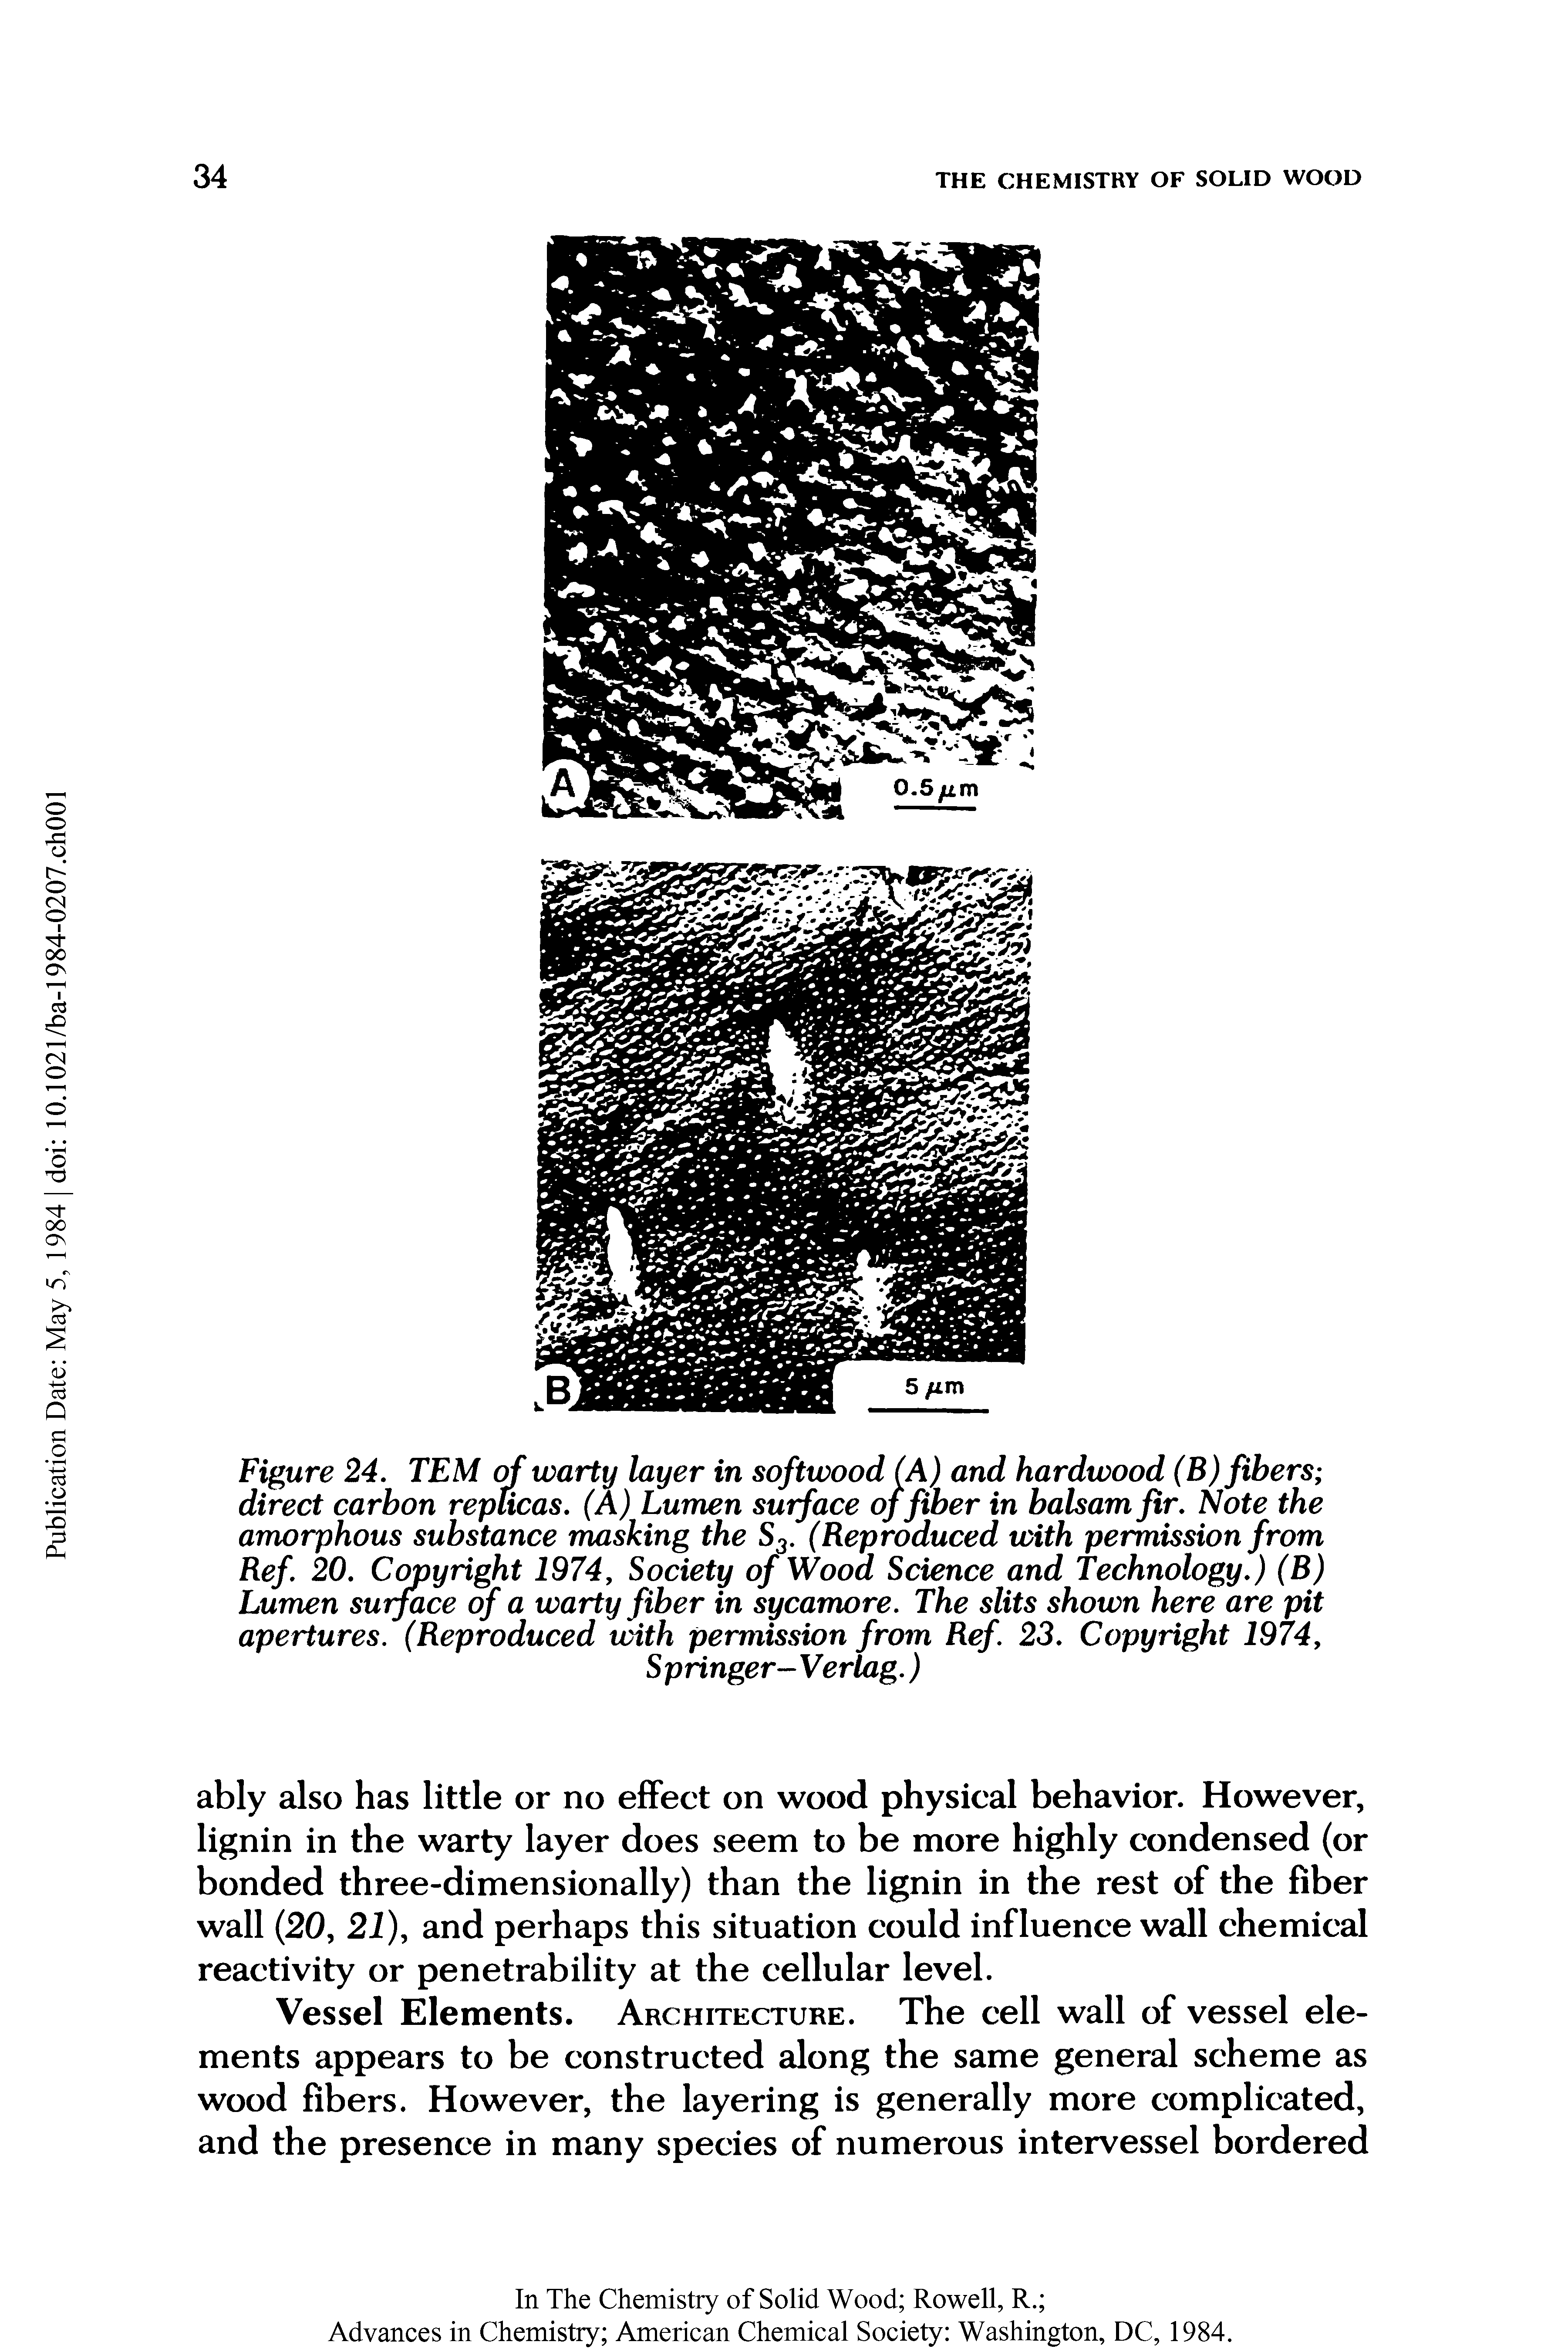 Figure 24. TEM of warty layer in softwood (A) and hardwood (B) fibers direct carbon replicas. (A) Lumen surface of fiber in balsam fir. Note the amorphous substance masking the S3. (Reproduced with permission from Ref. 20. Copyright 1974, Society of Wood Science and Technology.) (B) Lumen surface of a warty fiber in sycamore. The slits shown here are pit apertures. (Reproduced with permission from Ref 23. Copyright 1974,...